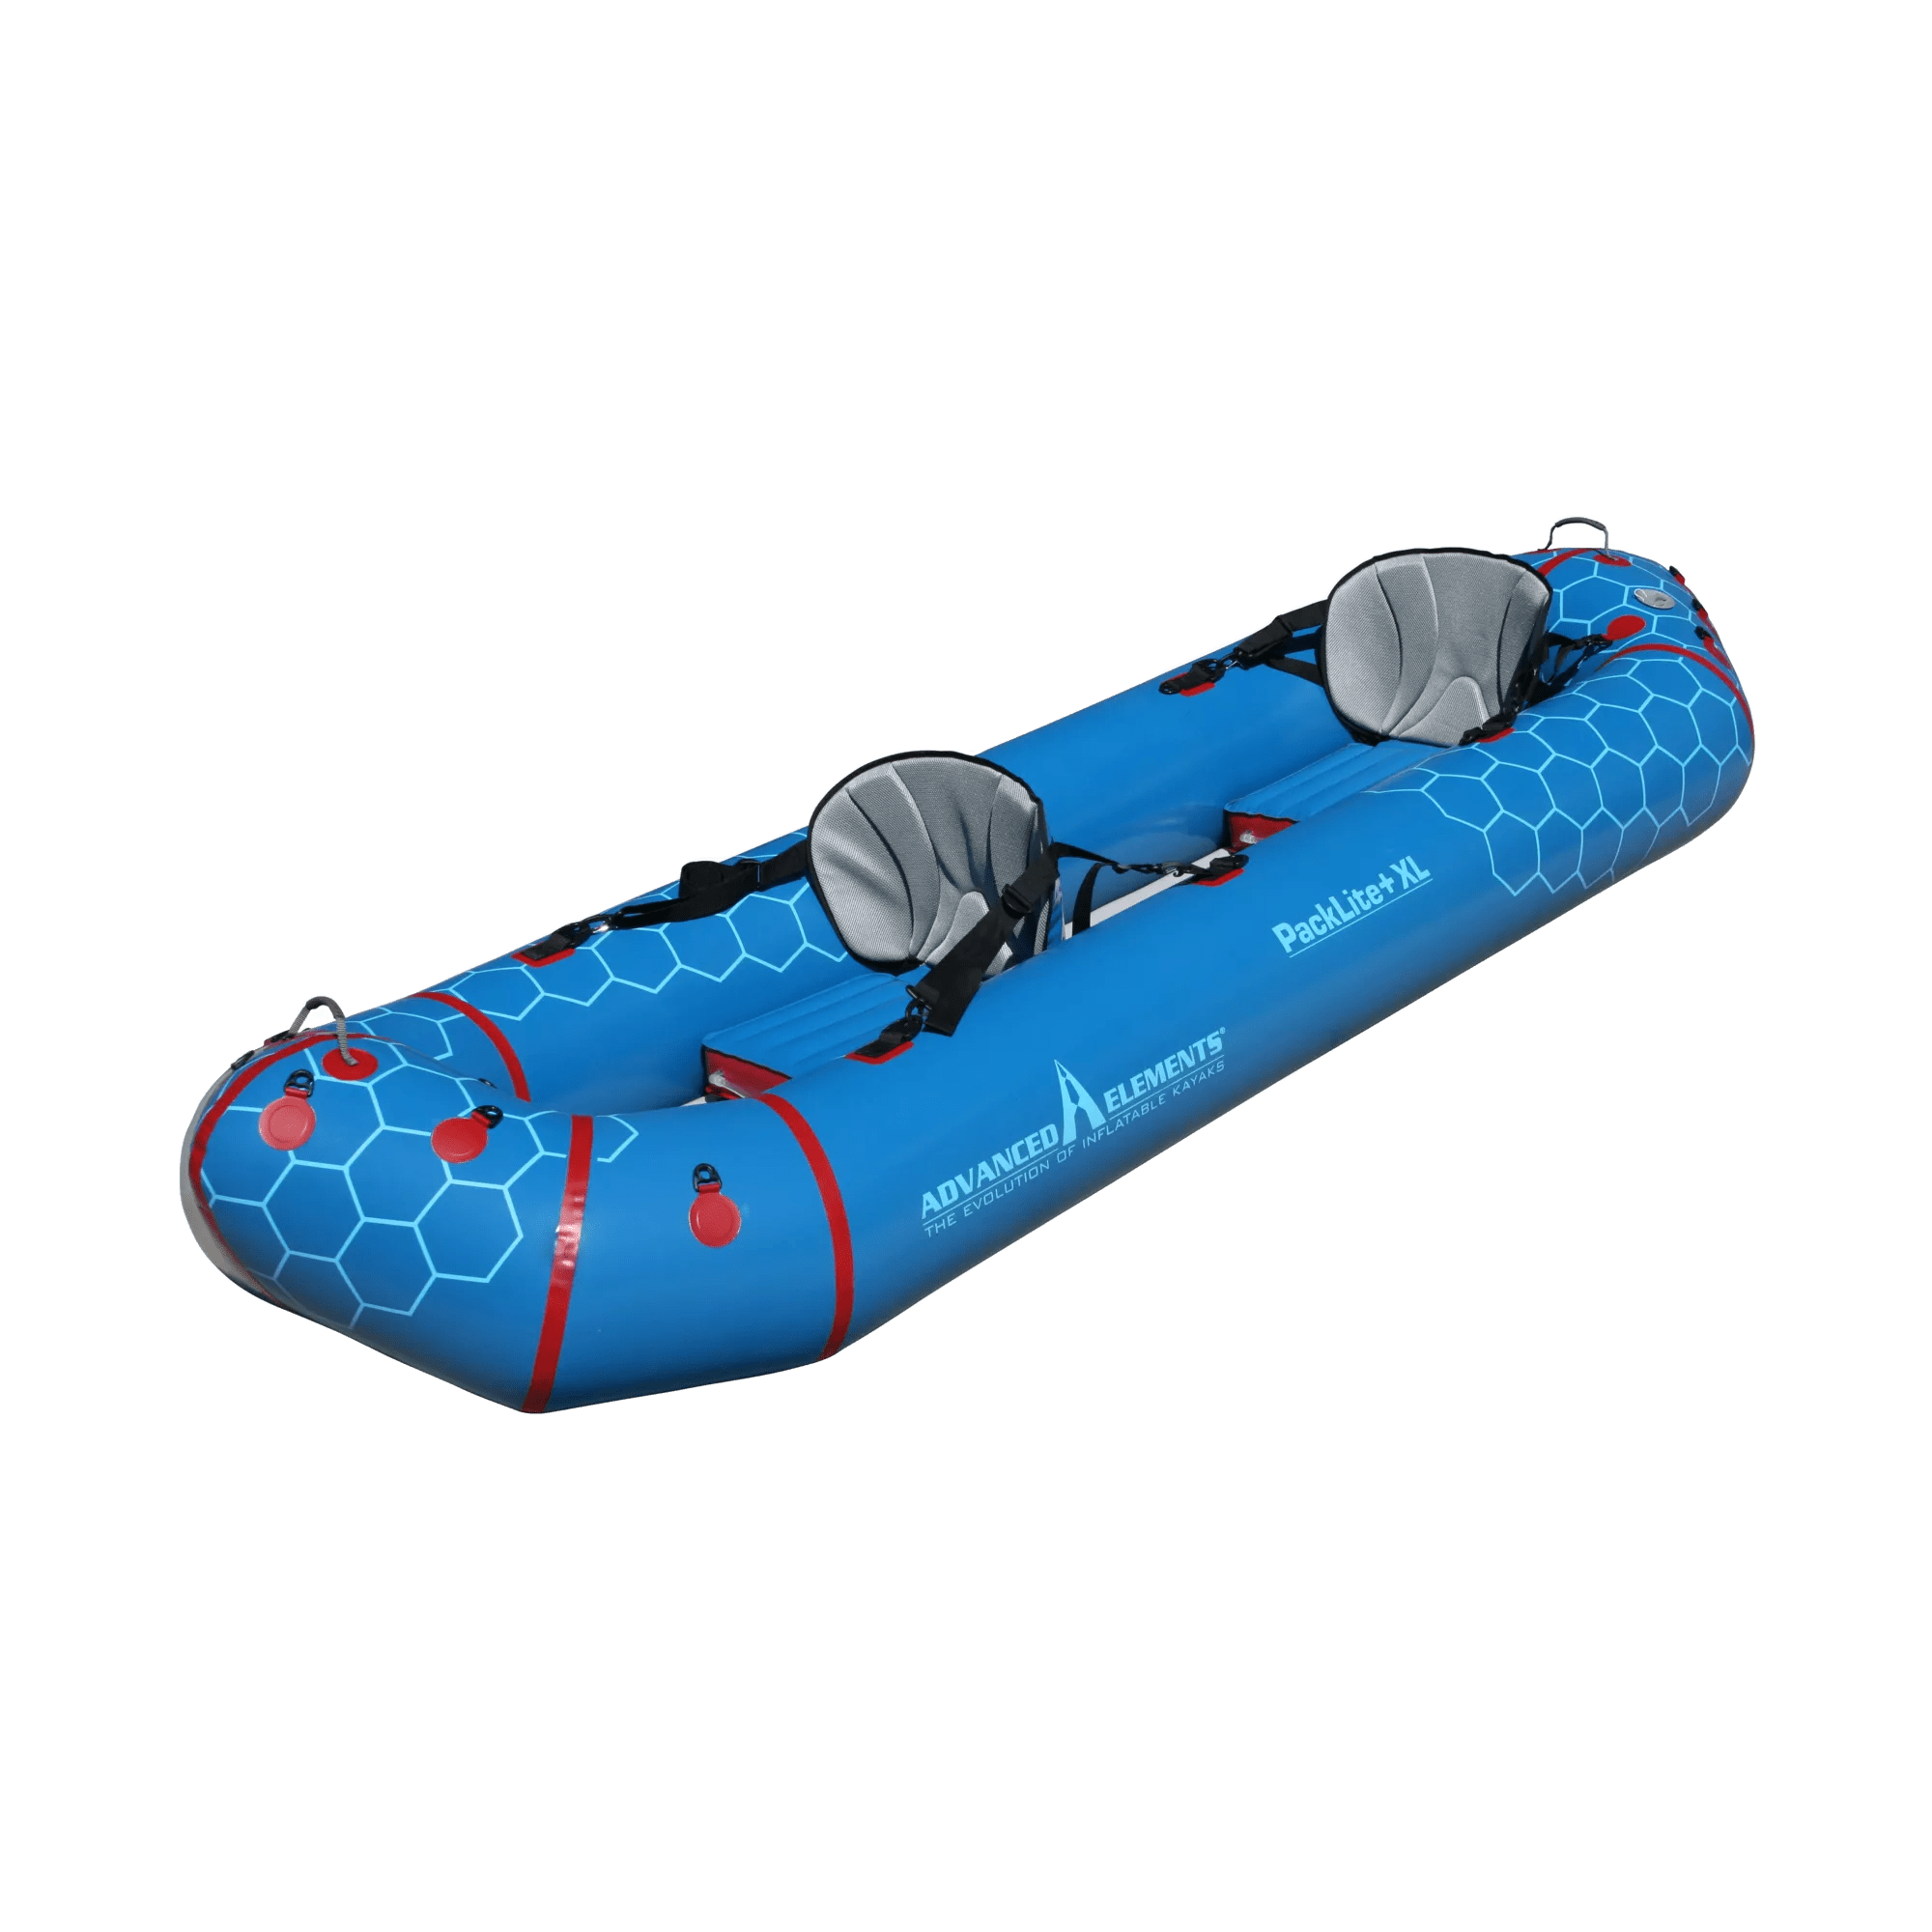 ADVANCED ELEMENTS - PackLite+™ XL Packraft - Blue - AE3038 - ISO